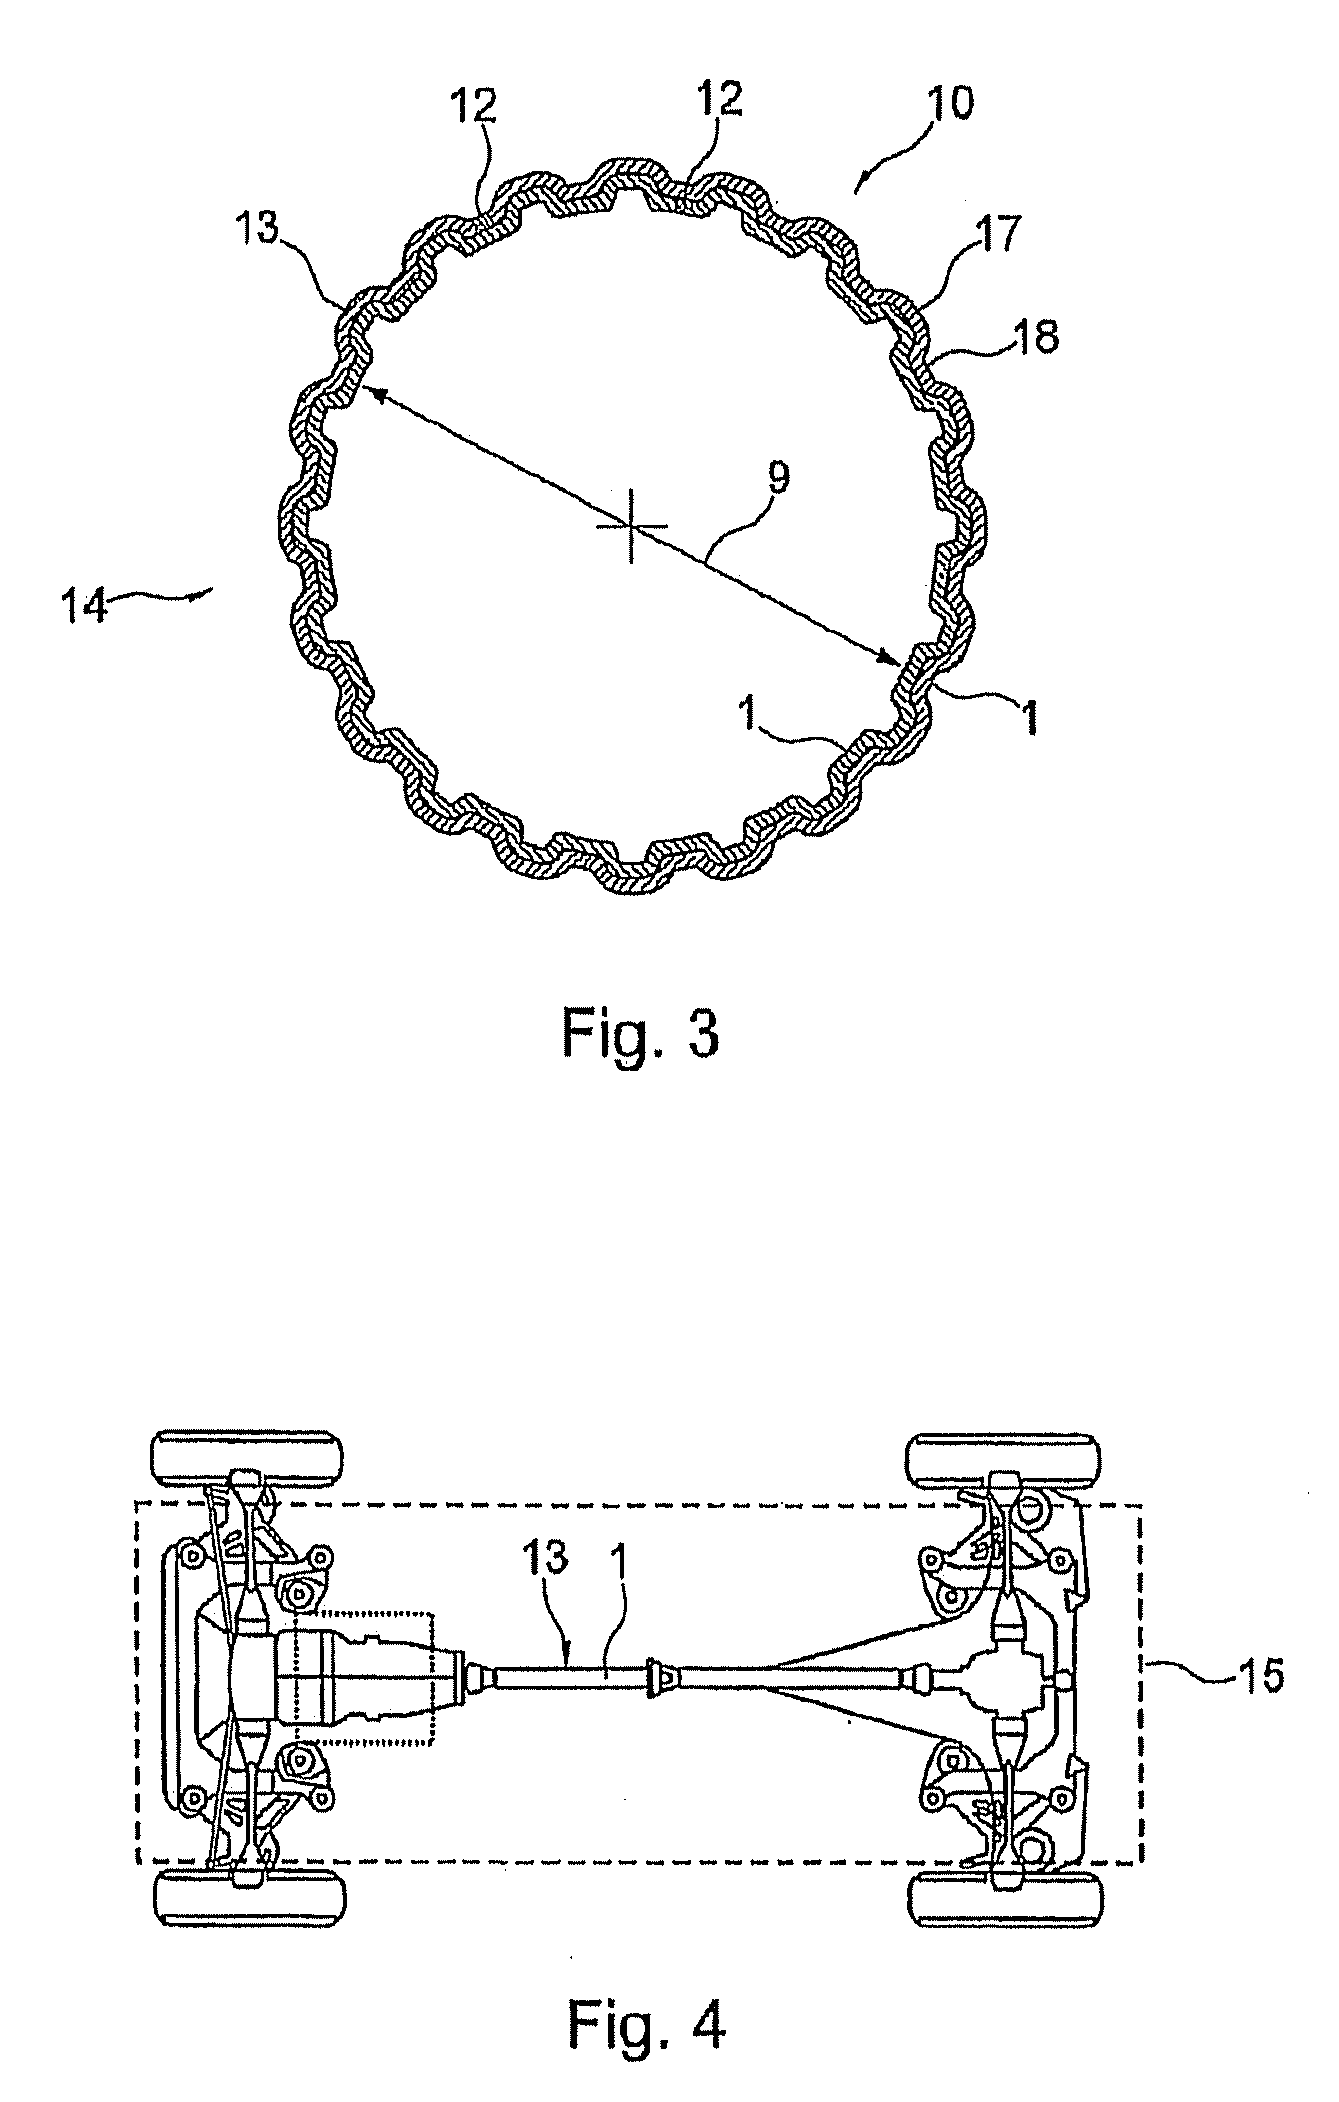 Method for forming hollow profiles